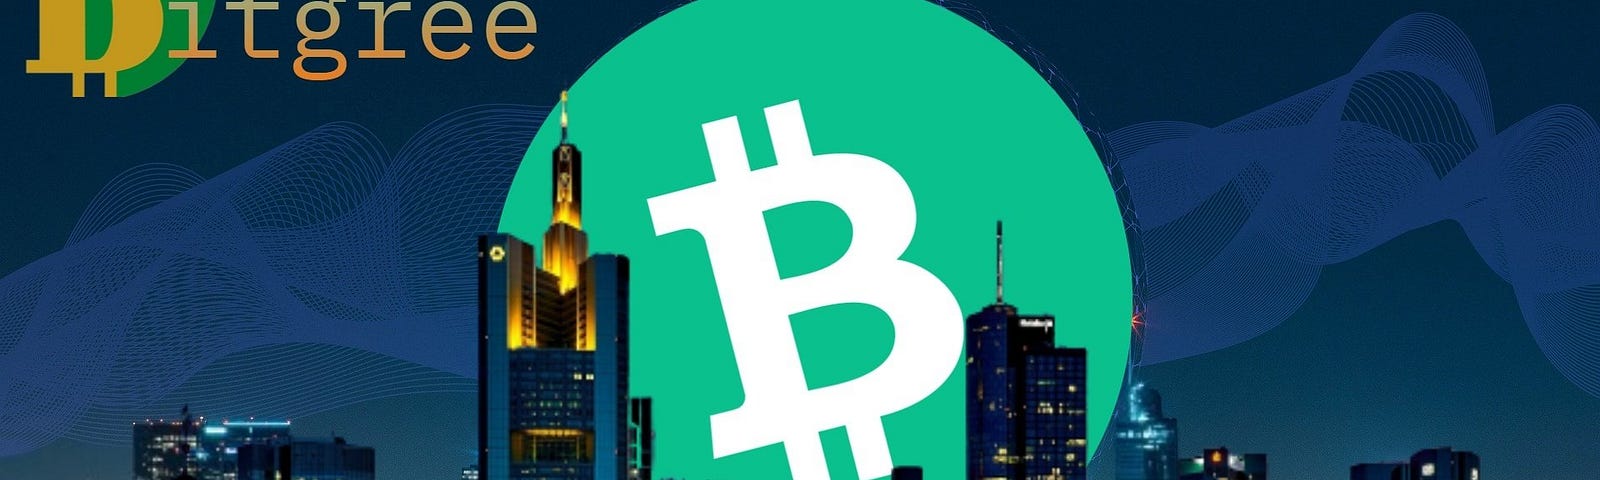 A modern city with buildings and skyscrapers with the Bitcoin Cash logo on the background. On the top left I added the logo of Bitgree.